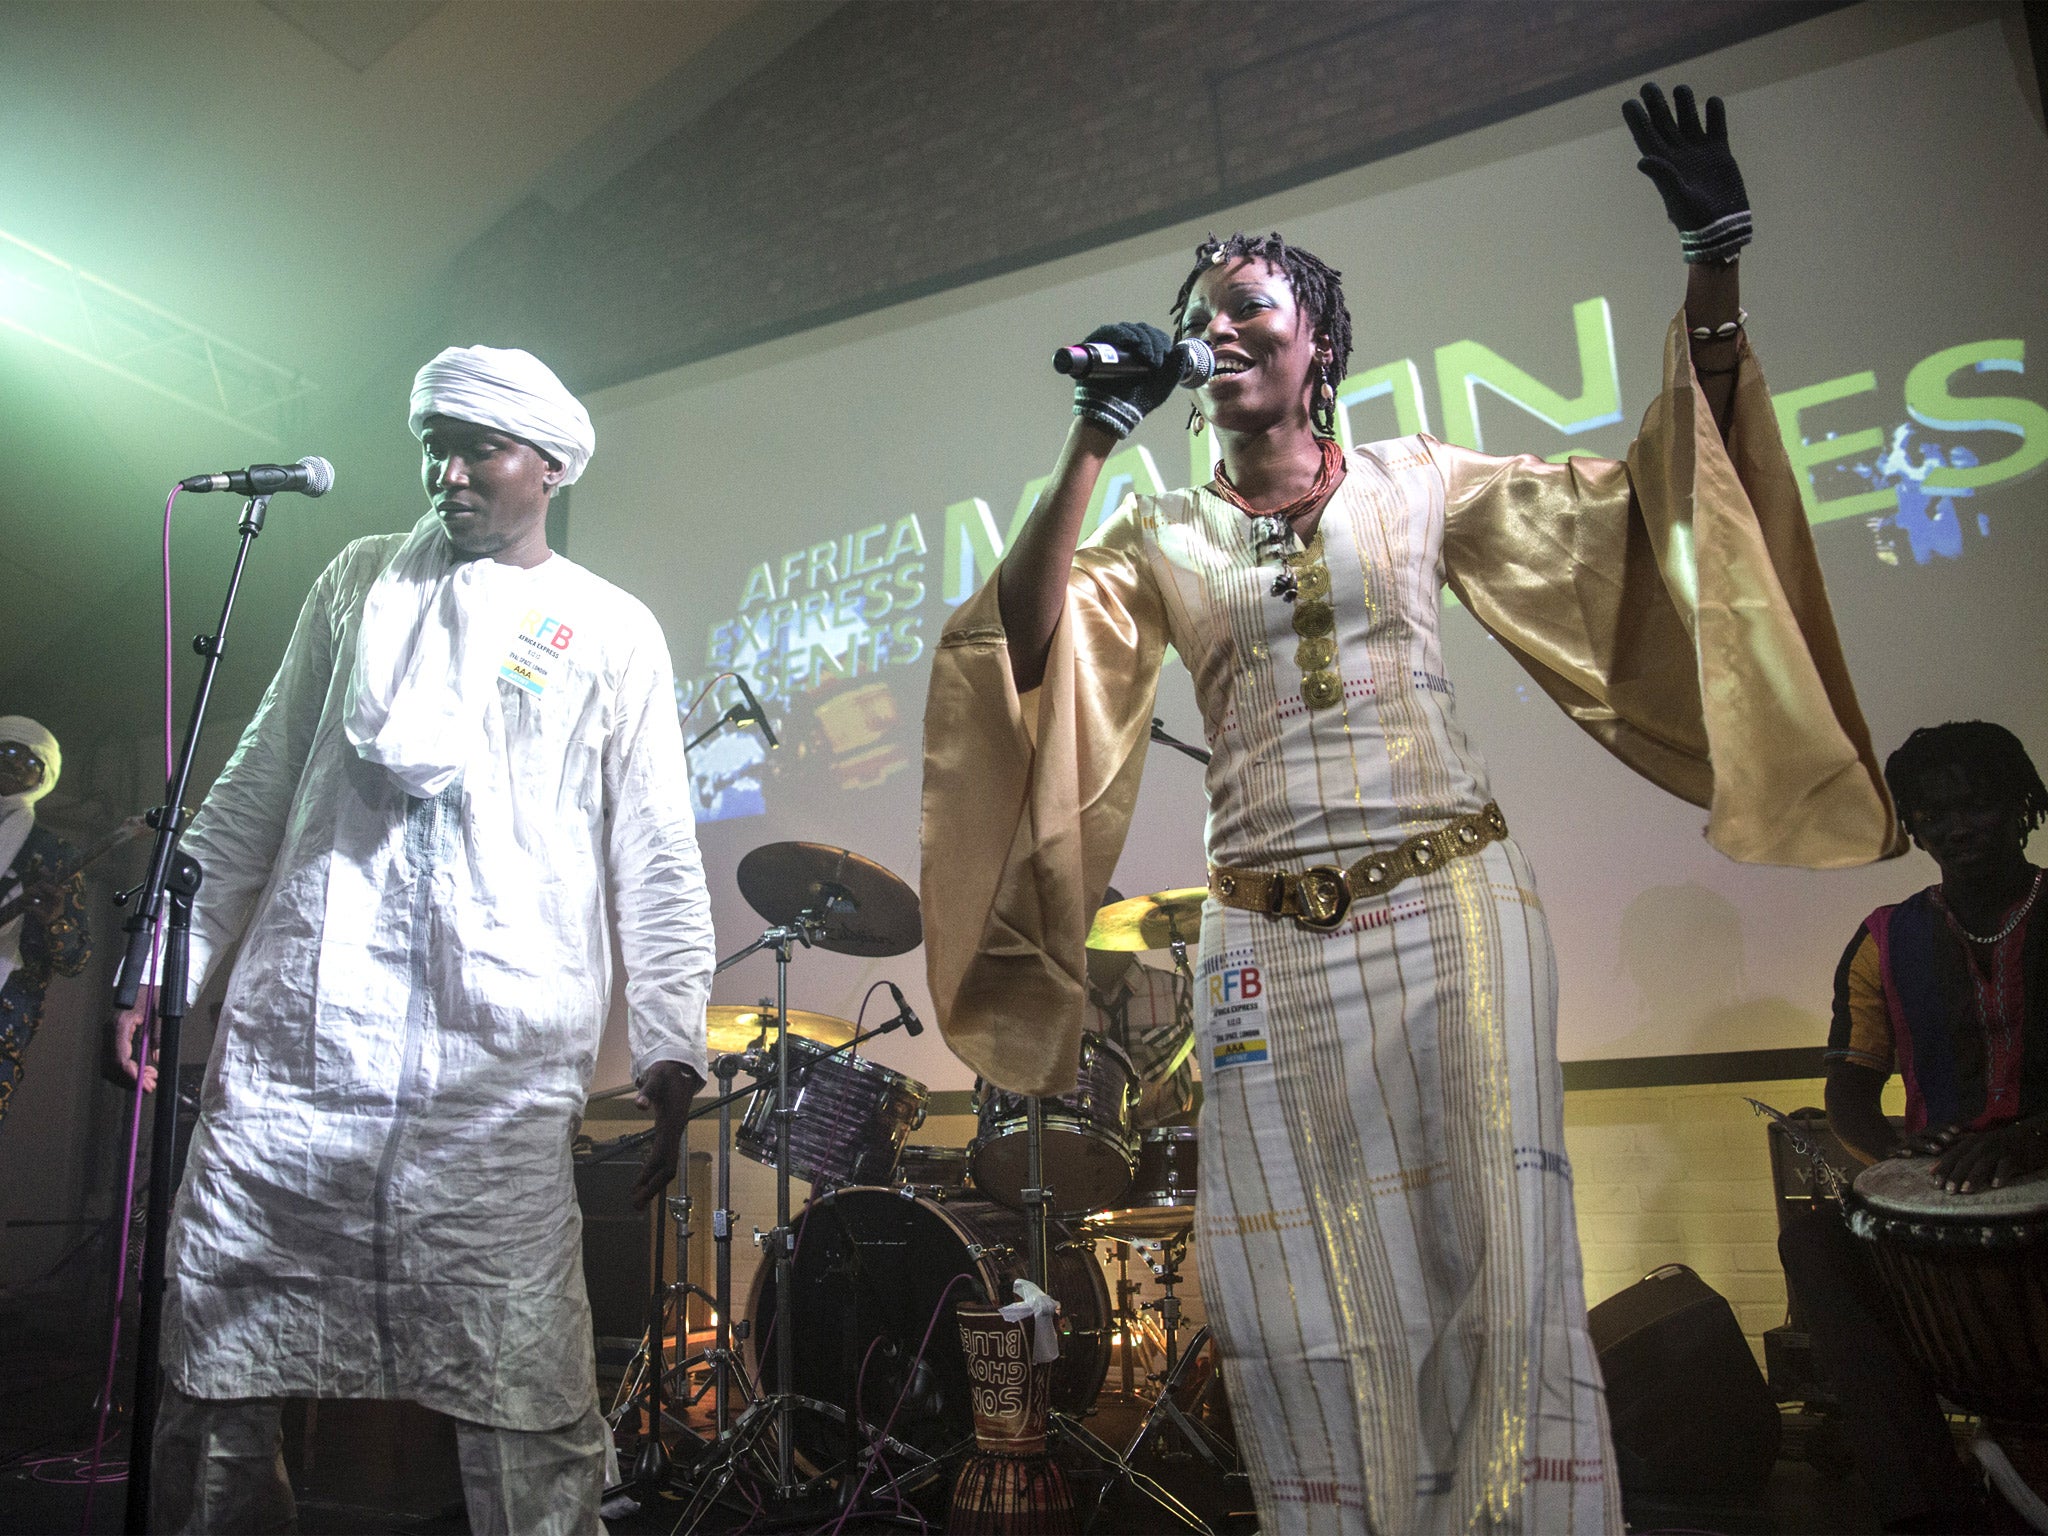 Malian artists Aliou Toure and Bijou at their London album launch. To get here they had to fly to Senegal and wait weeks for visas